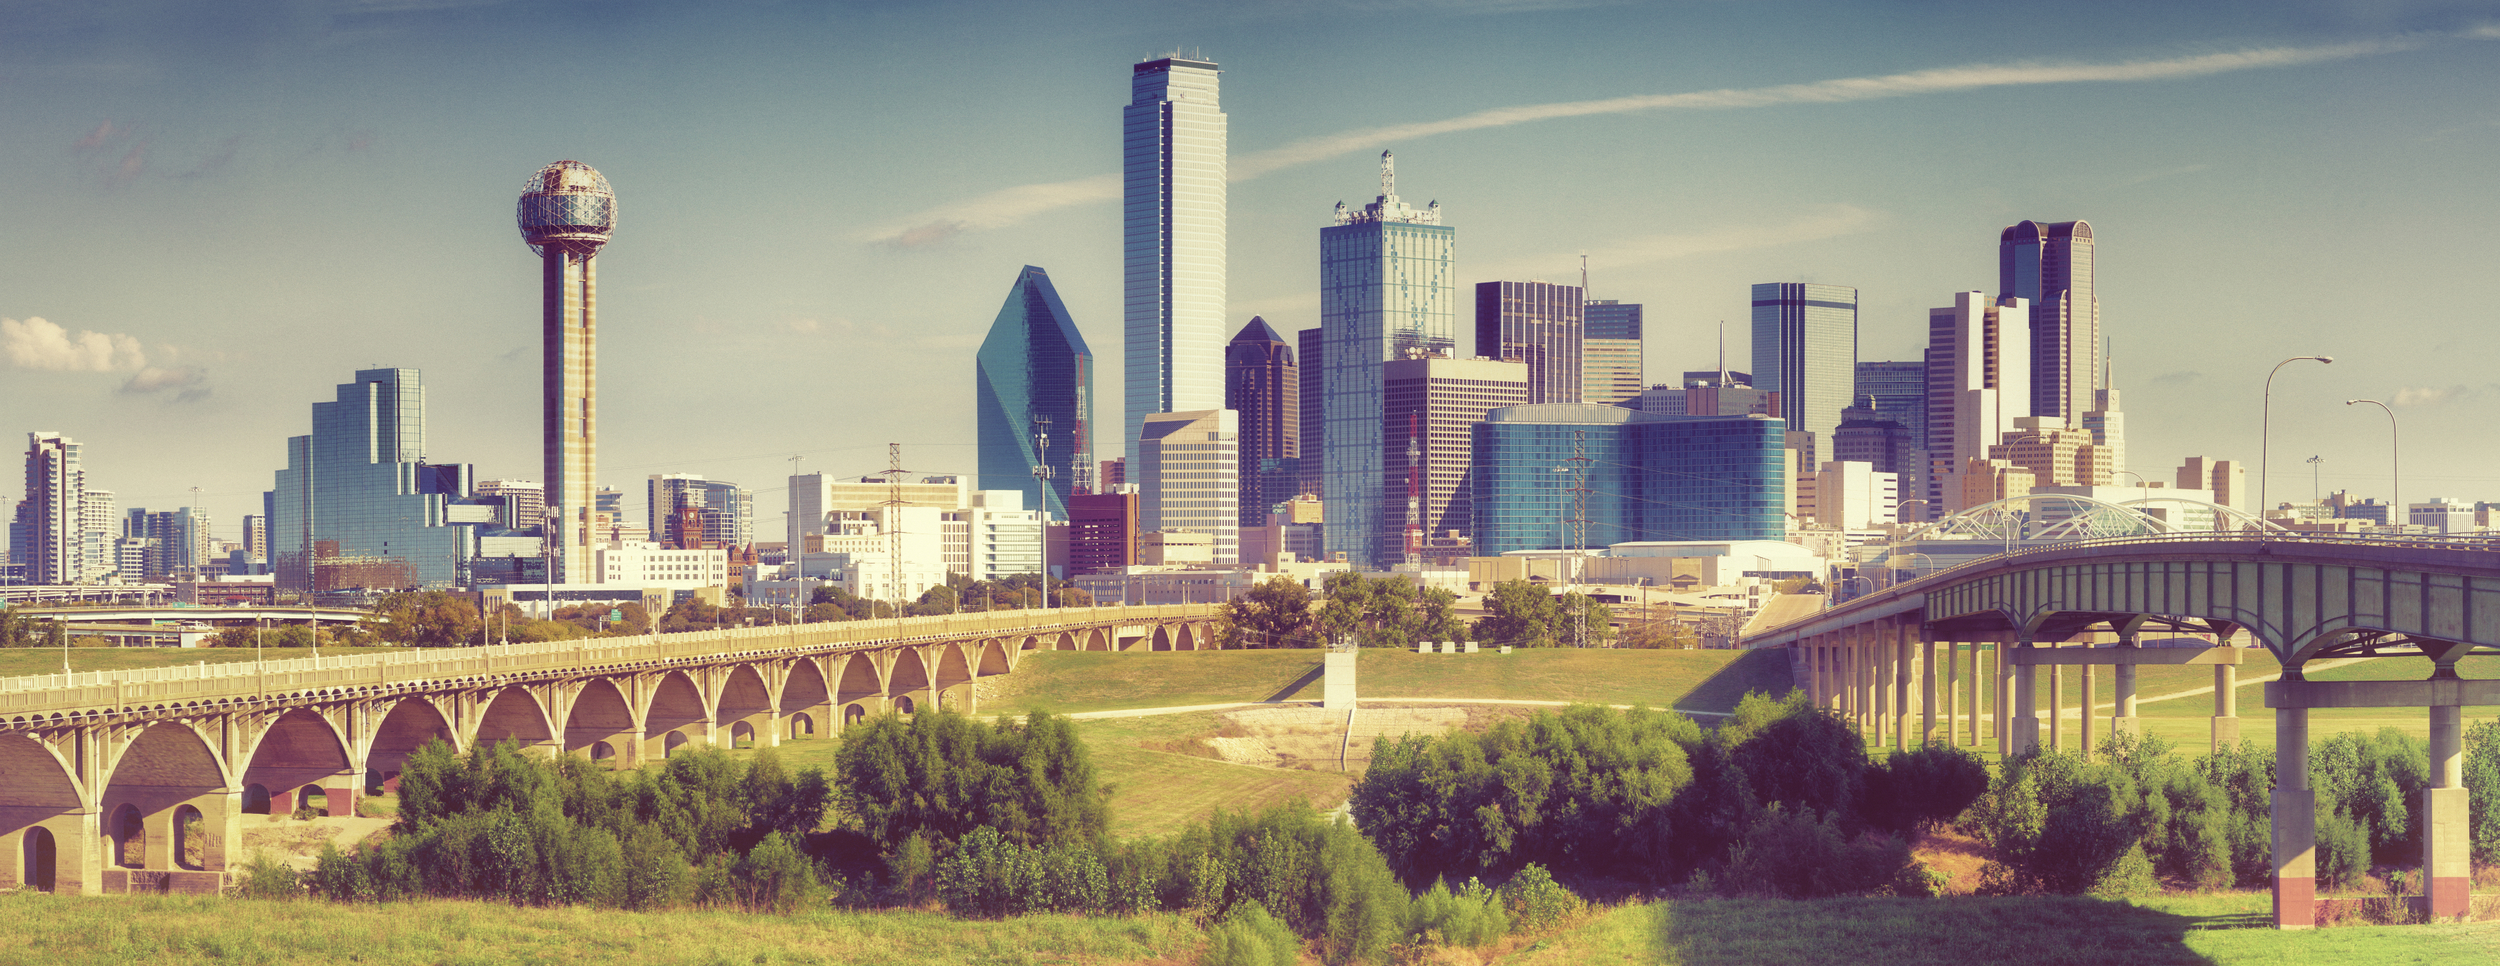 Nice Images Collection: Dallas Desktop Wallpapers